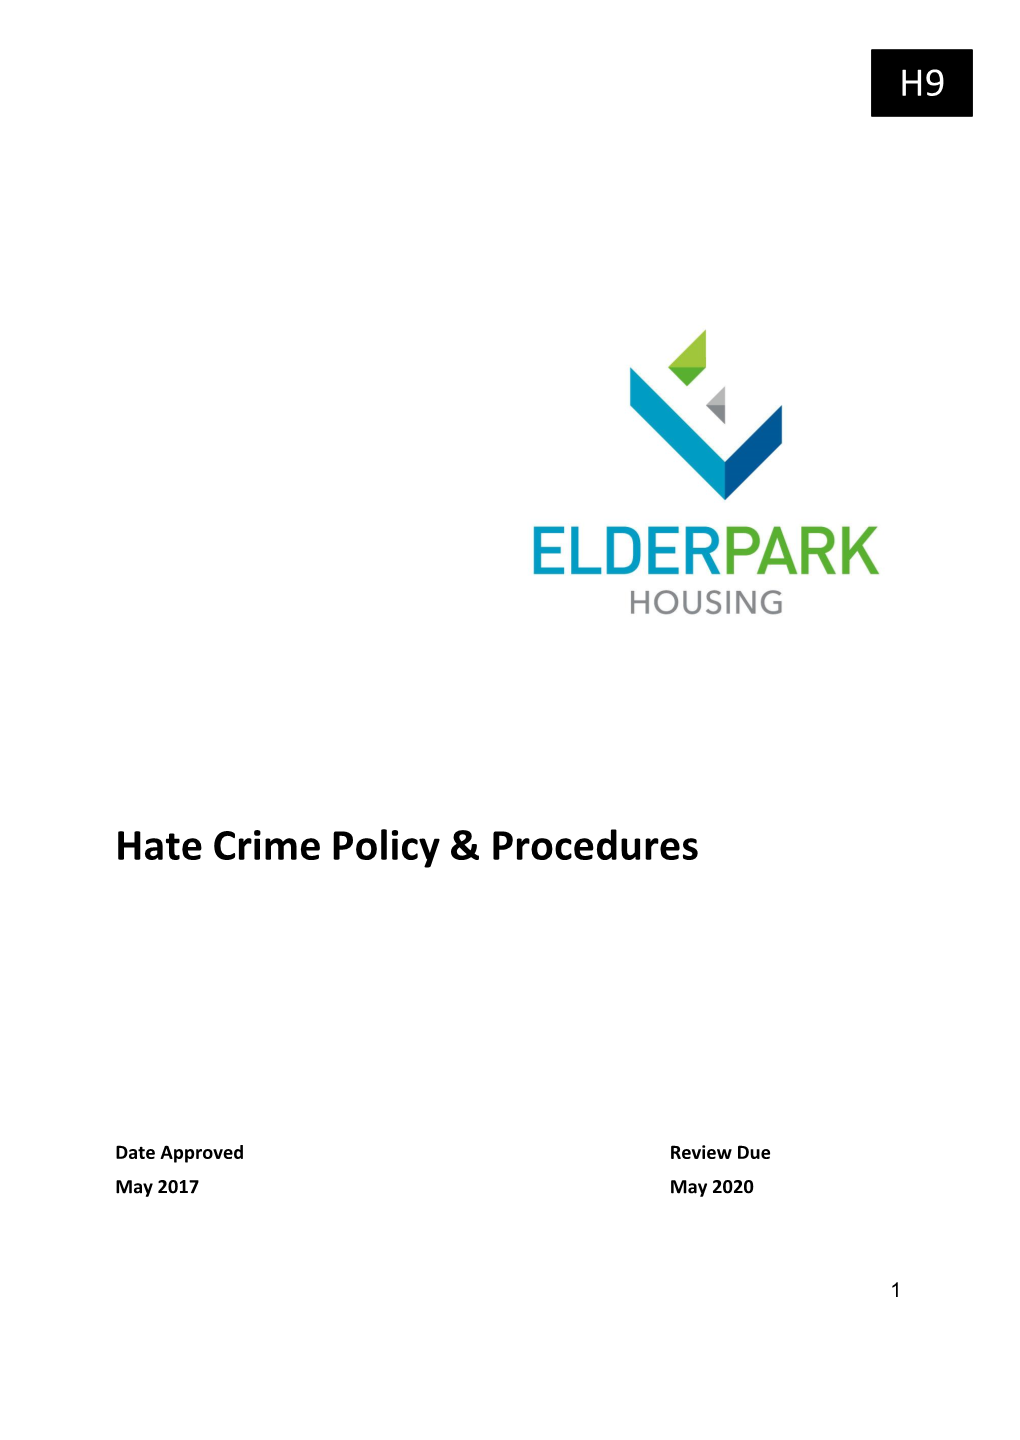 Hate Crime Policy & Procedures